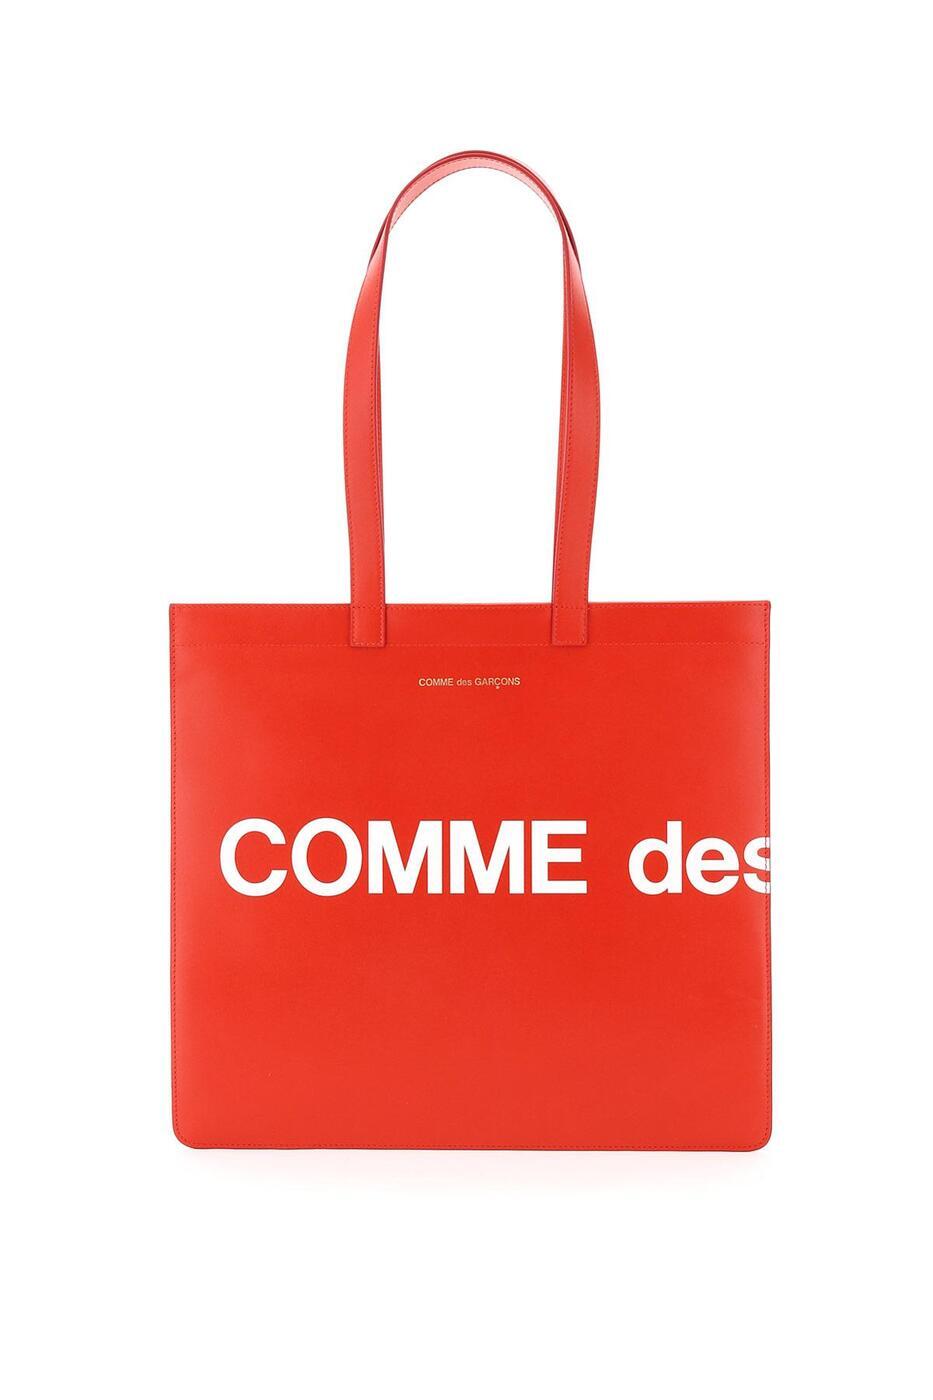 COMME DES GARCONS コム デ ギャルソン レッド Red トートバッグ メンズ 7981618069653 【関税・送料無料】【ラッピング無料】 ba